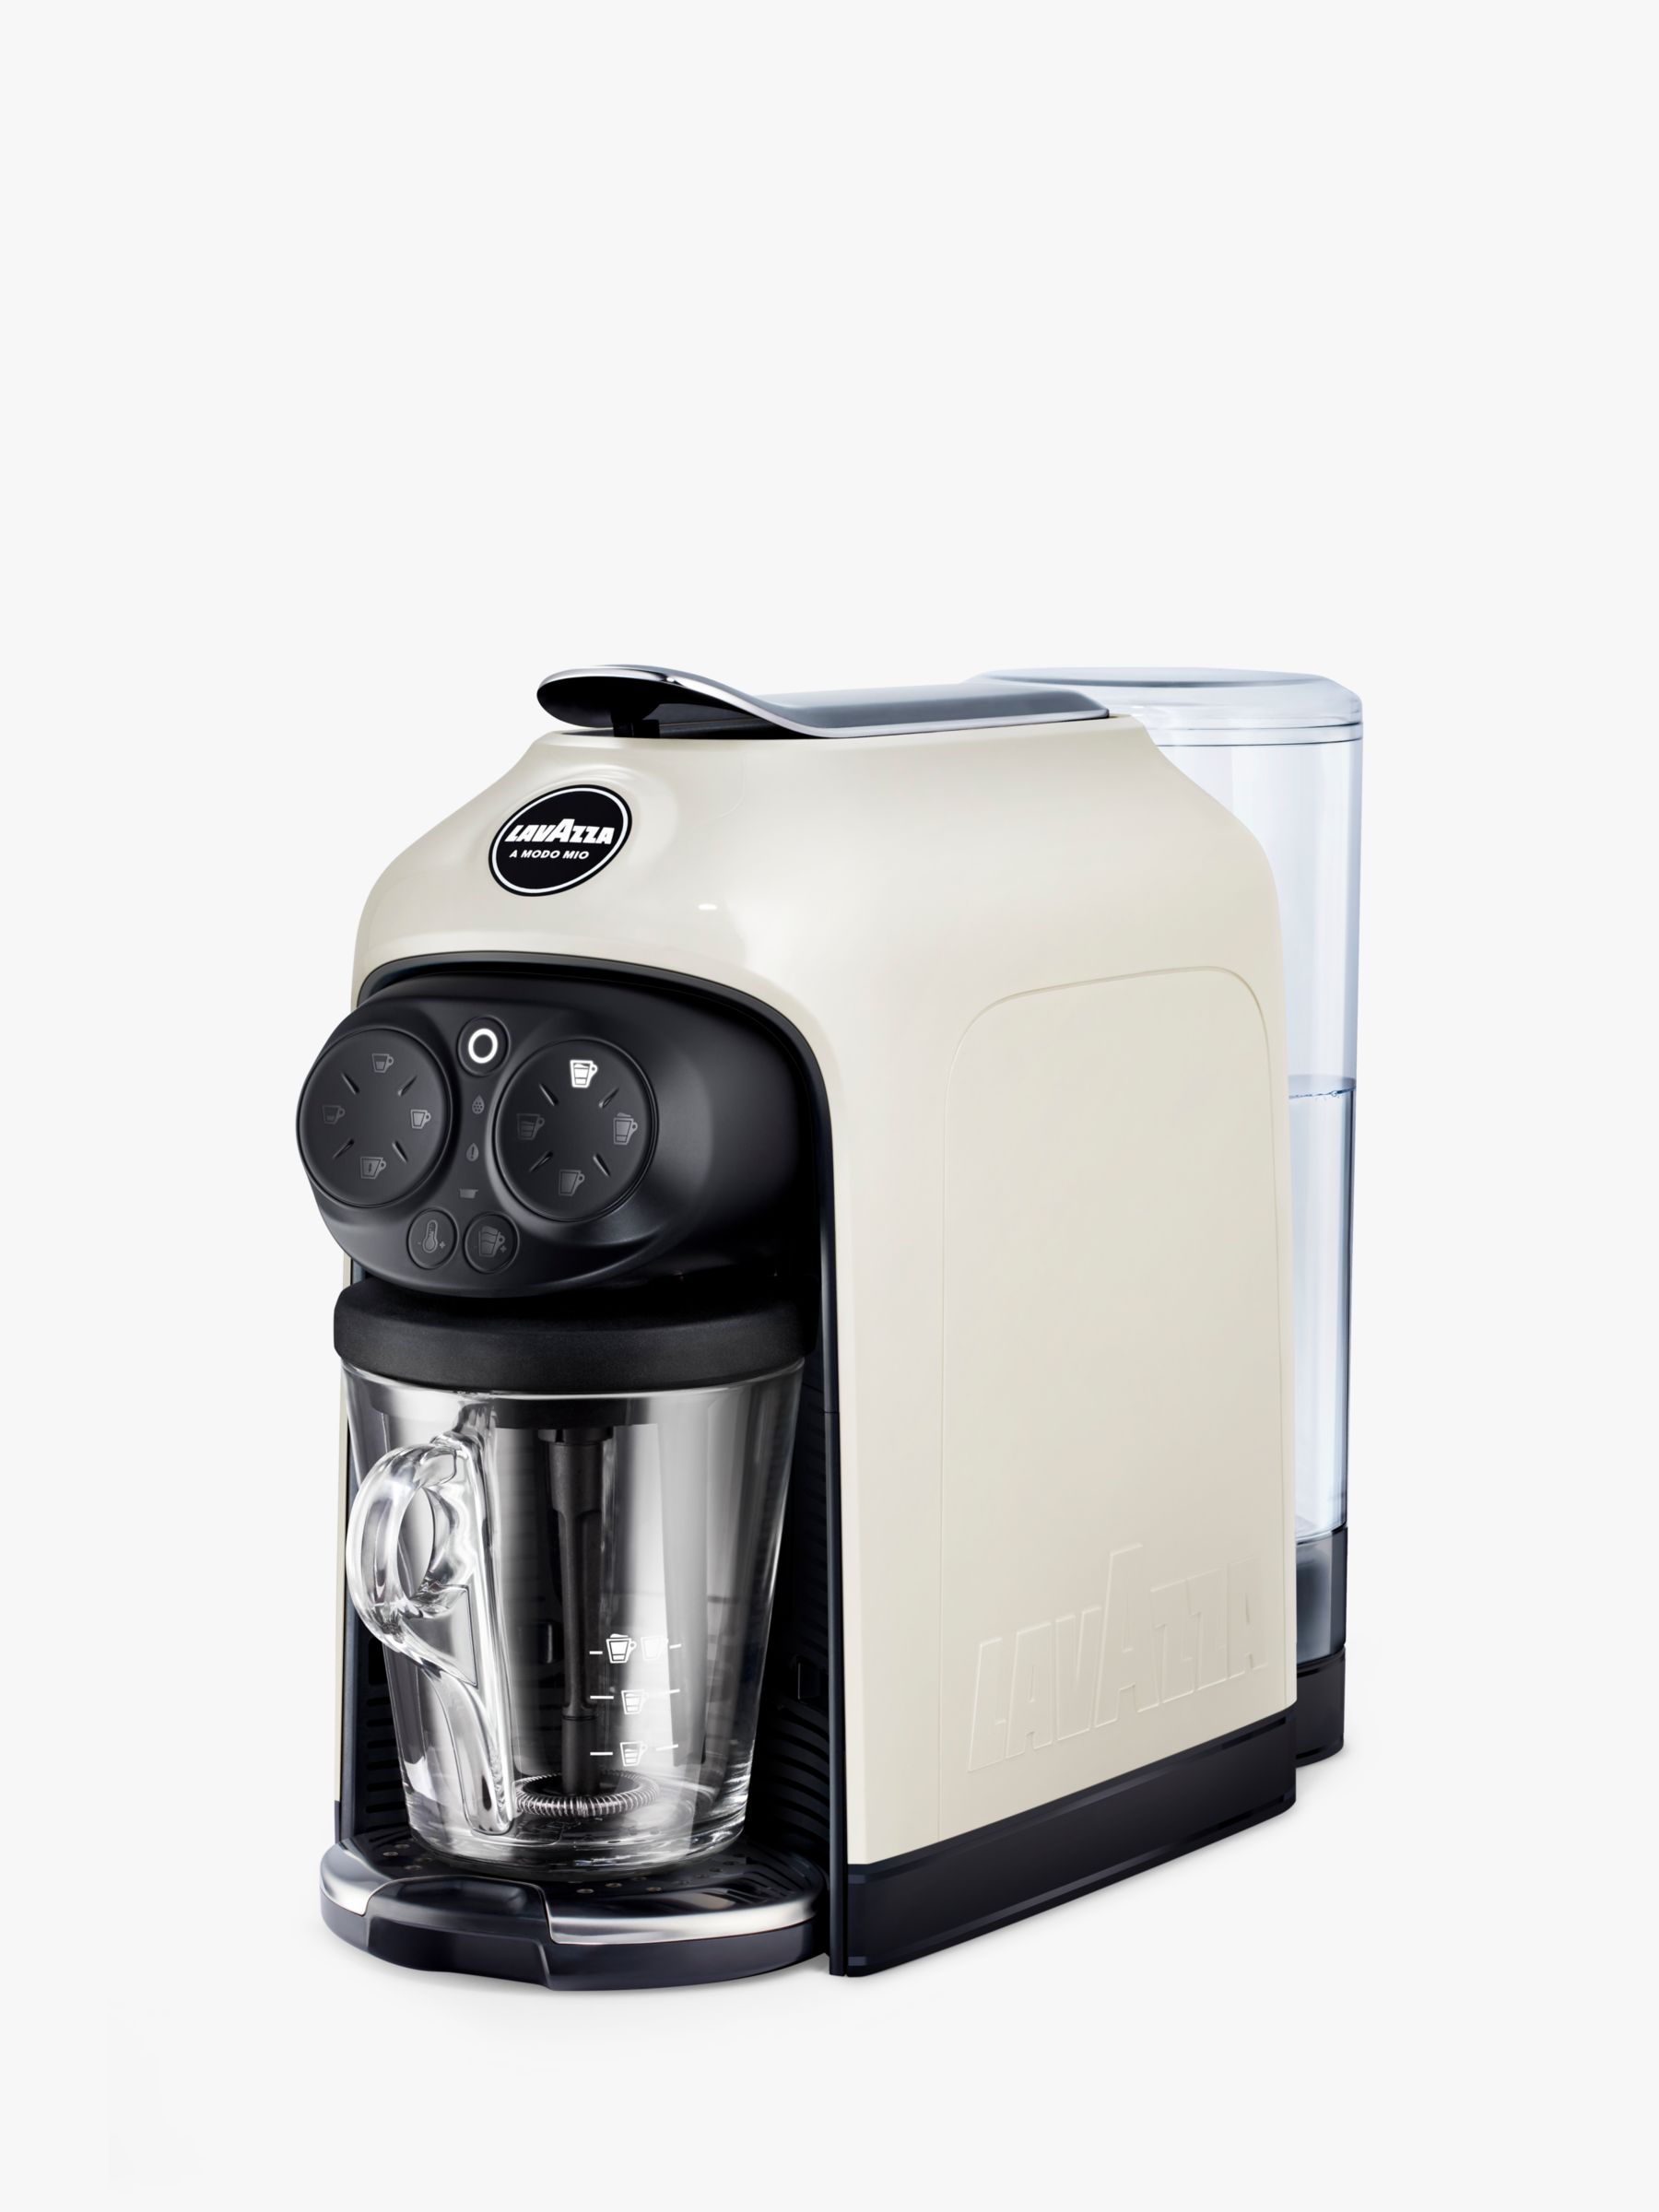 LG Duobo 2-Capsule Coffee Maker Blends Two Coffees in One Cup